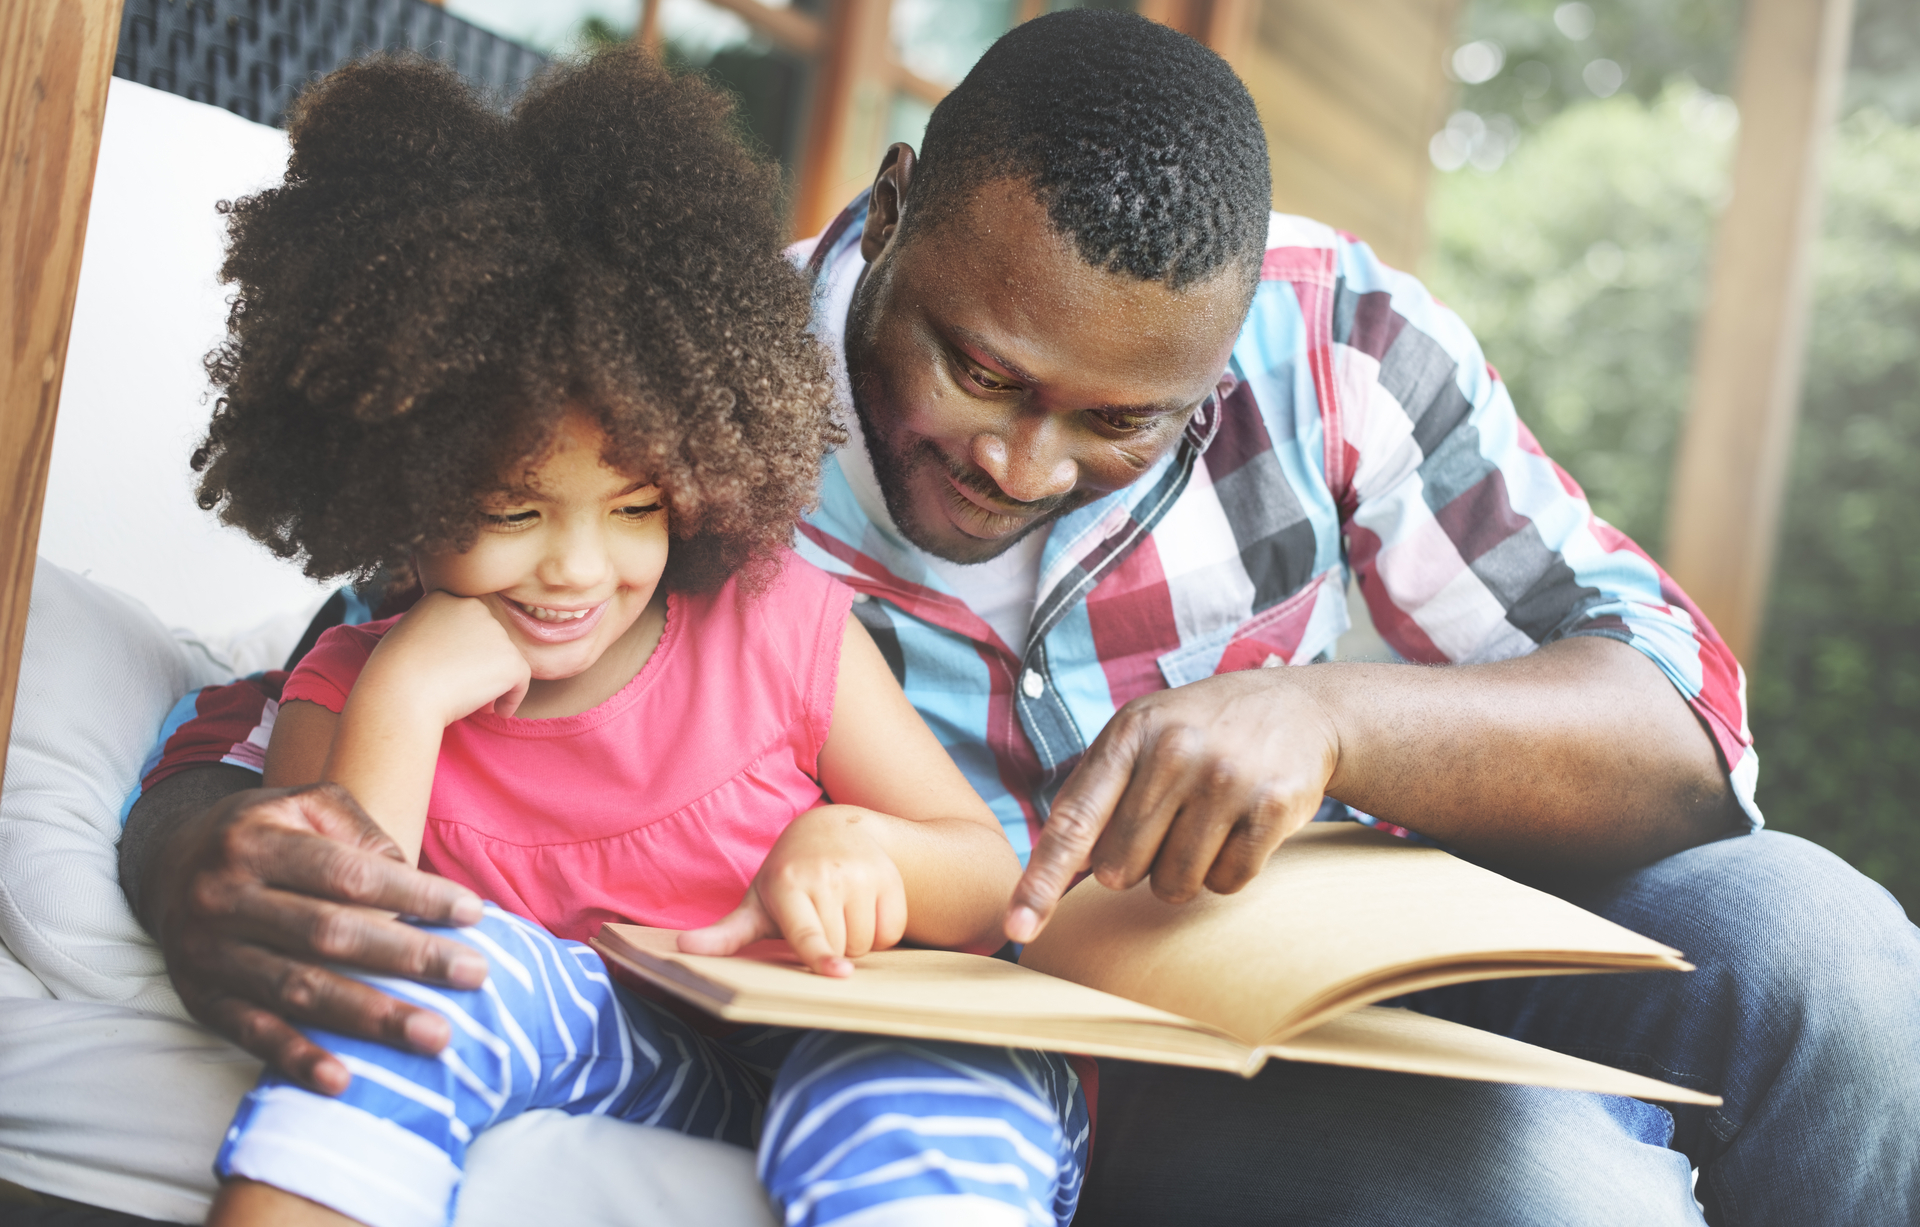 A father and his daughter reading together.